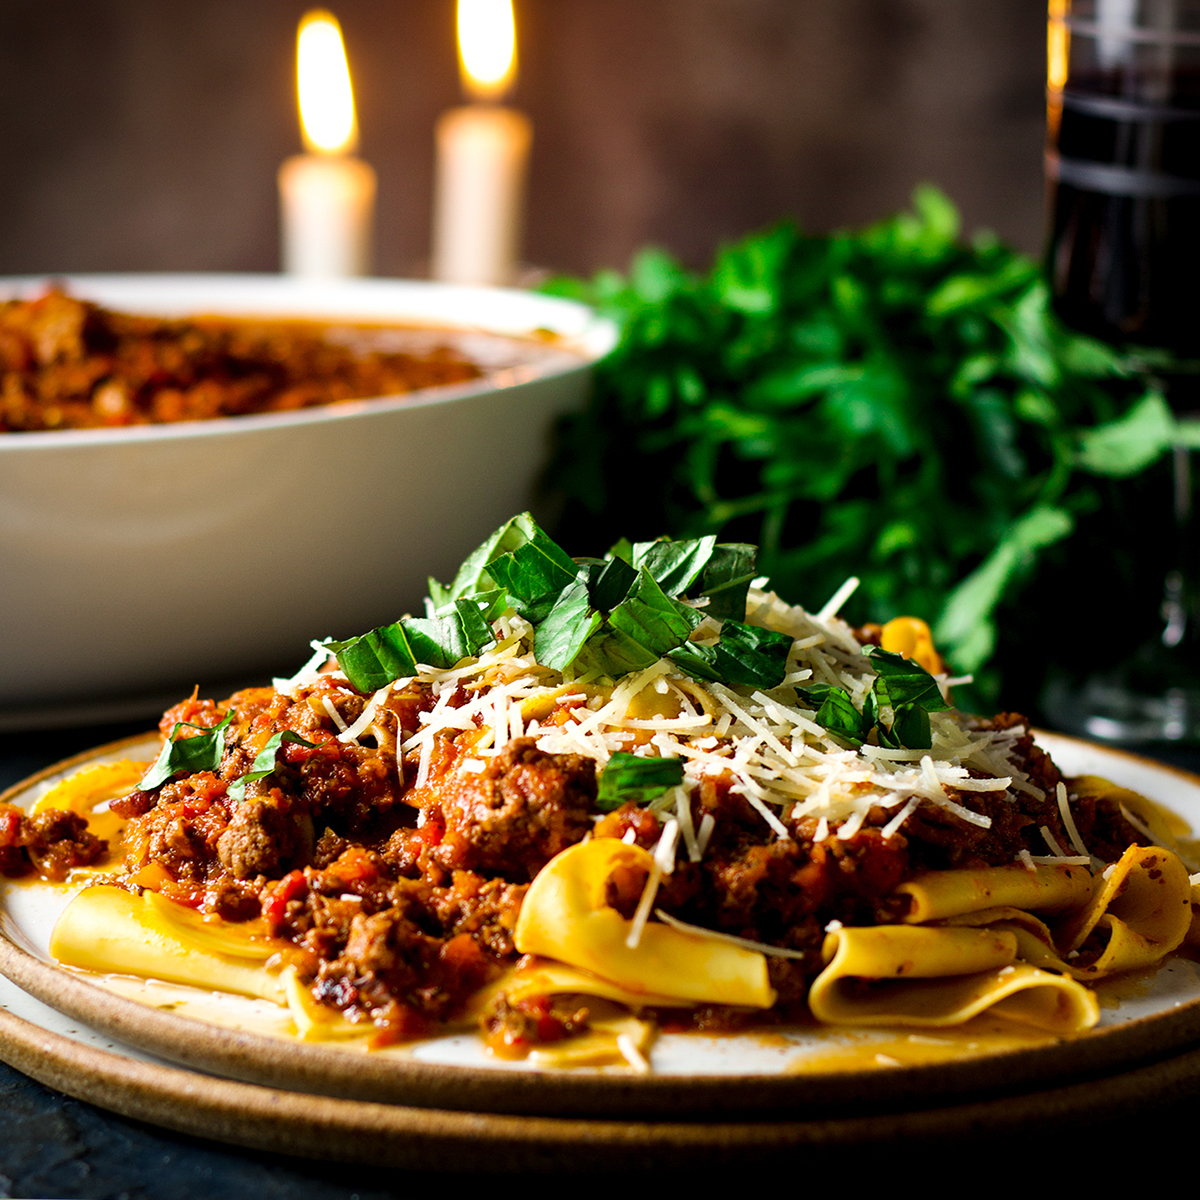 A plate of pasta covered in bolognese sauce and grated parmesan cheese.